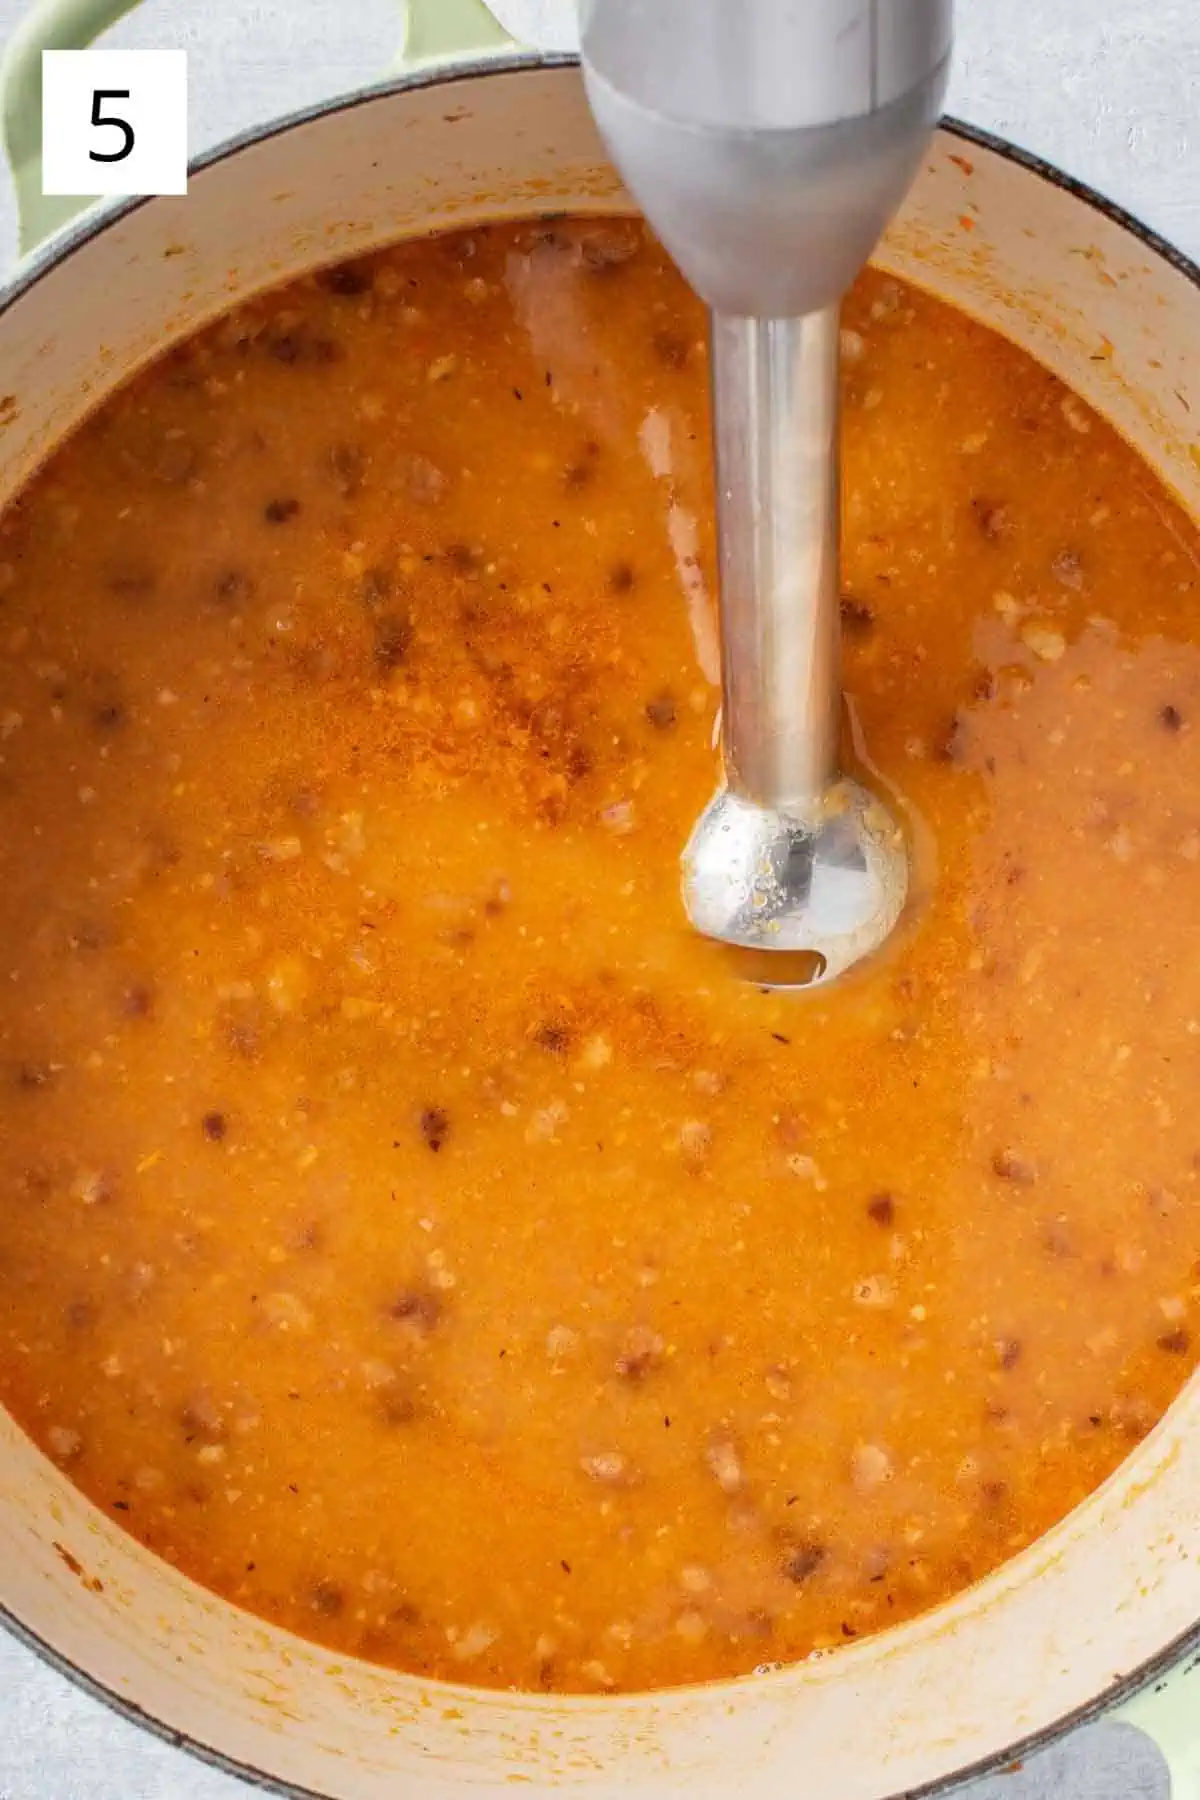 Blending soup in a pot with an immersion blender.